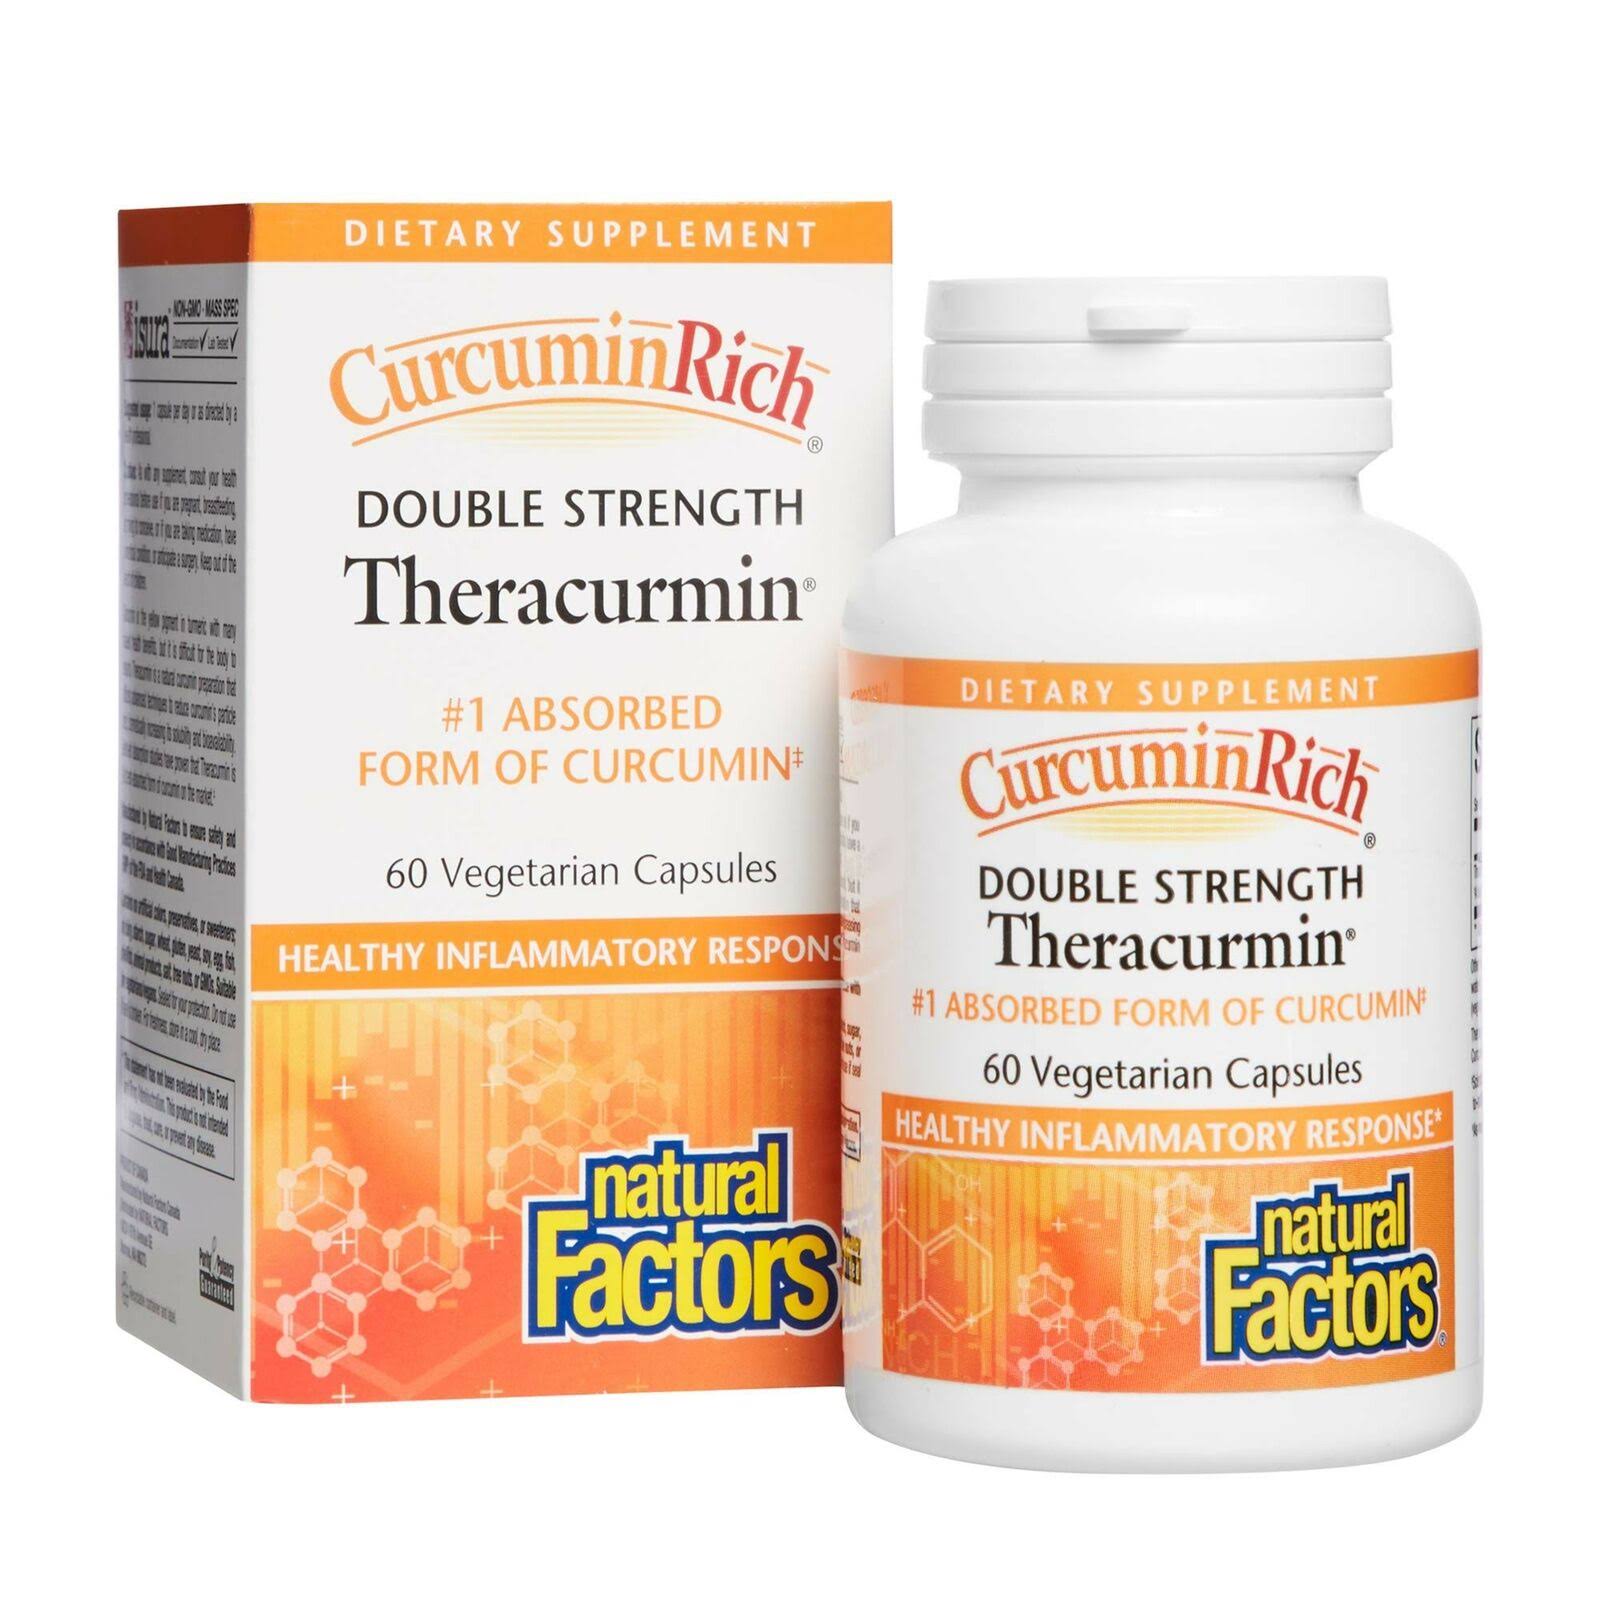 CurcuminRich Double Strength Theracurmin Supplement - 60 Count